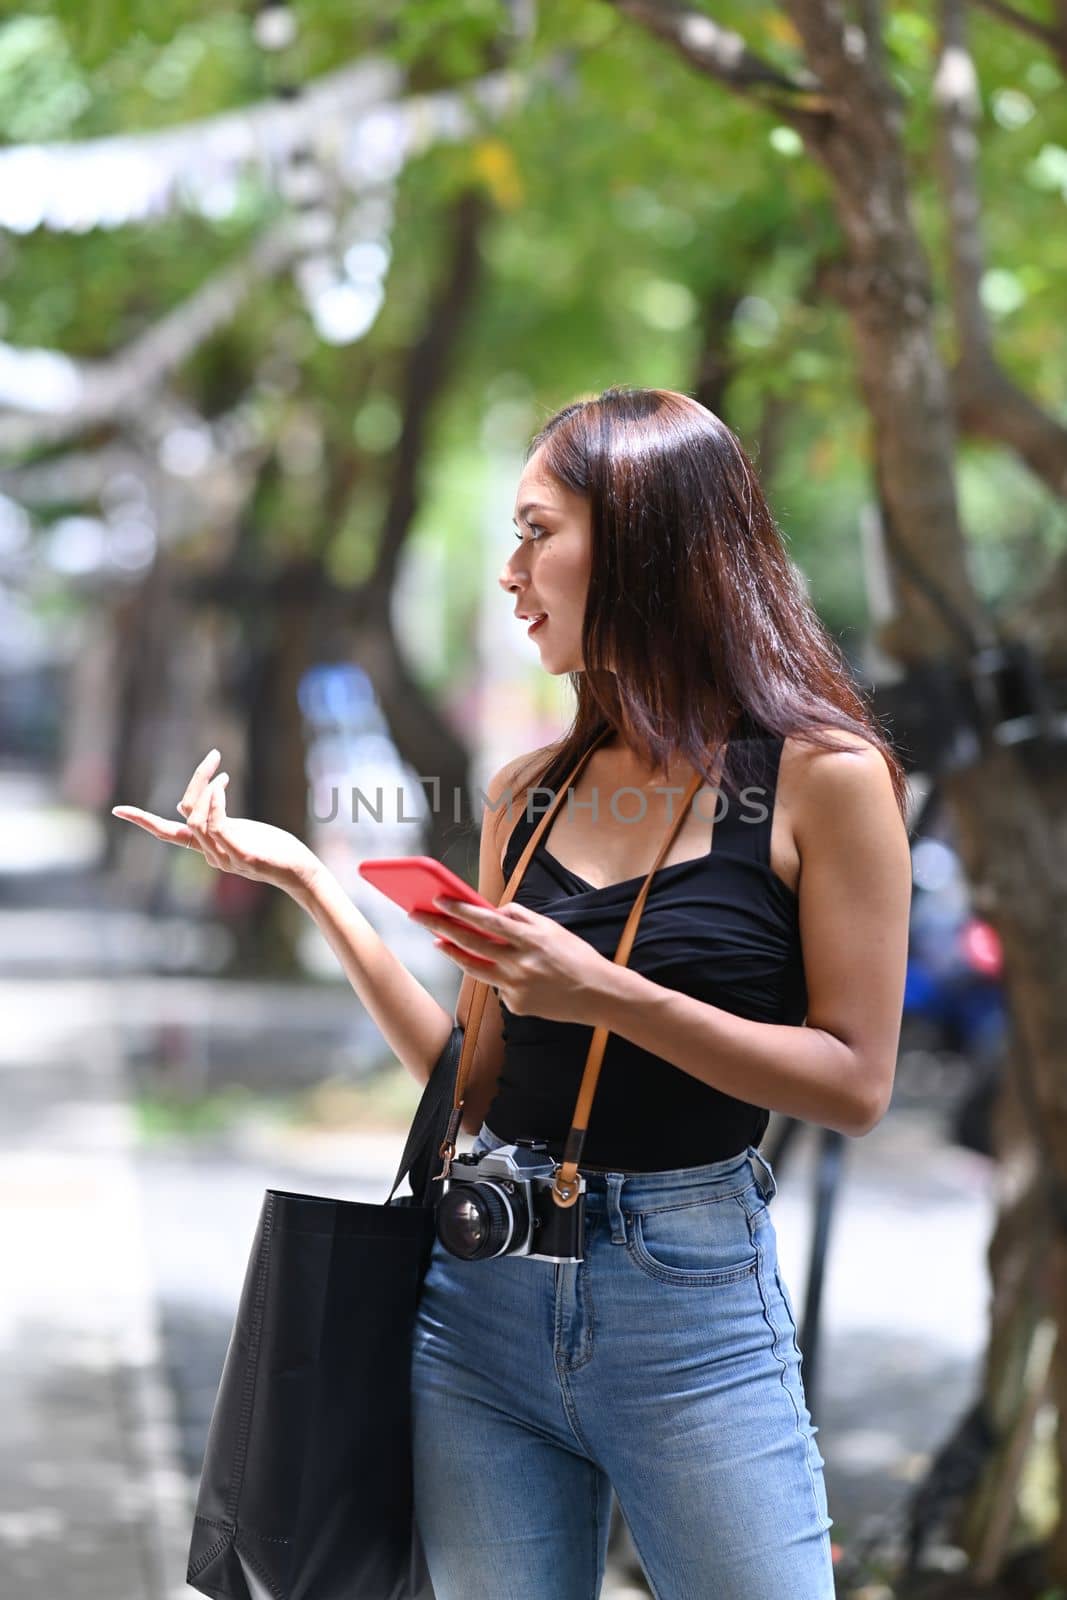 Female traveler holding smart phone and walking in the city street.